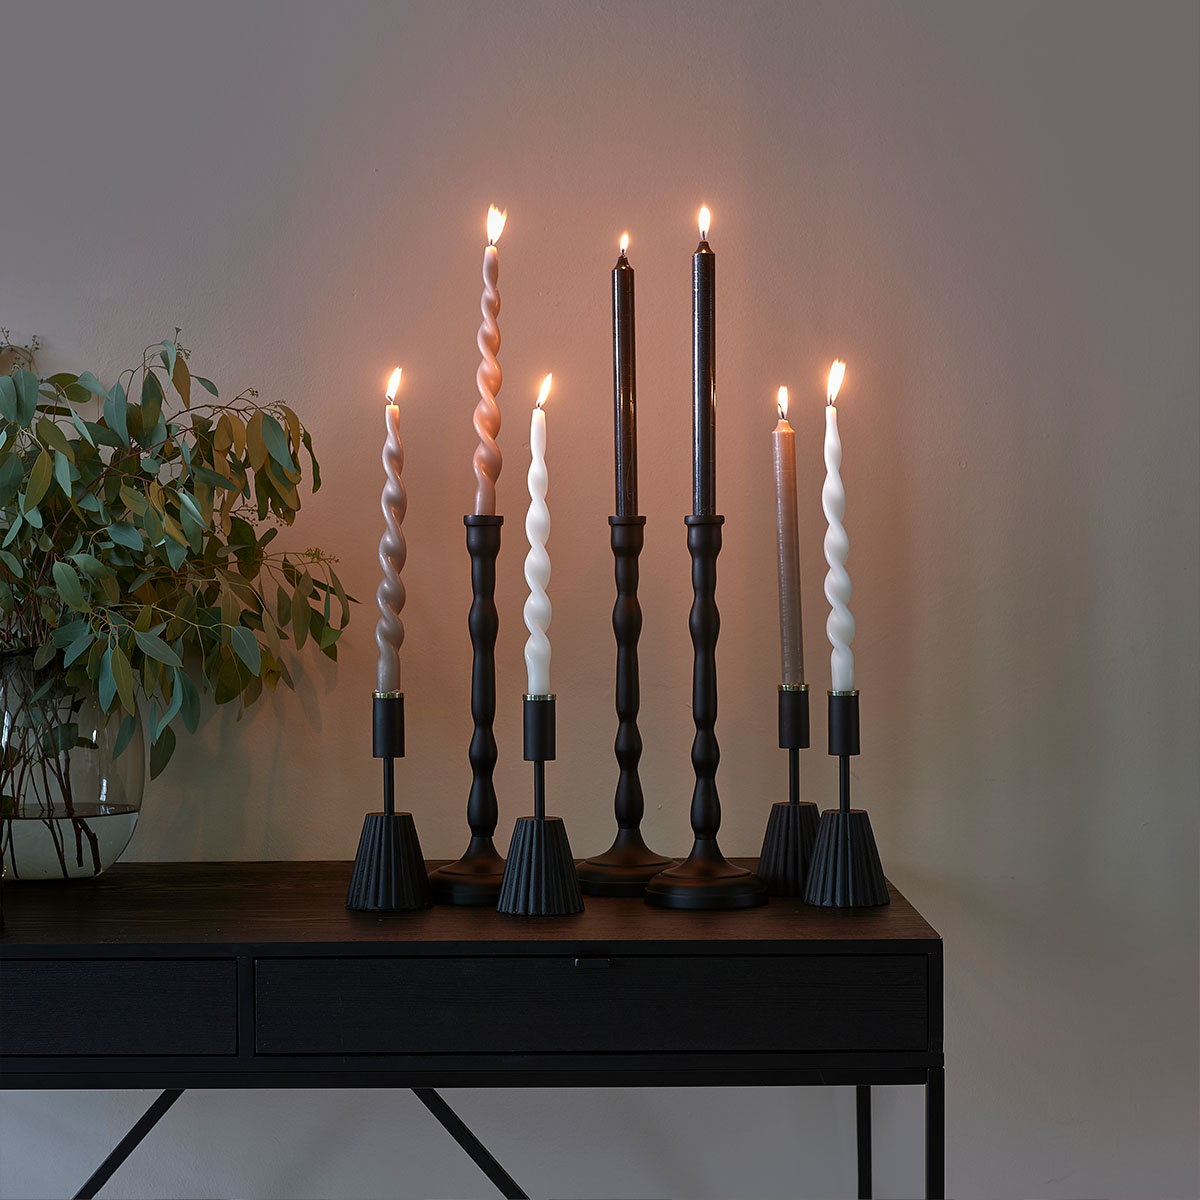 Candles and candleholders